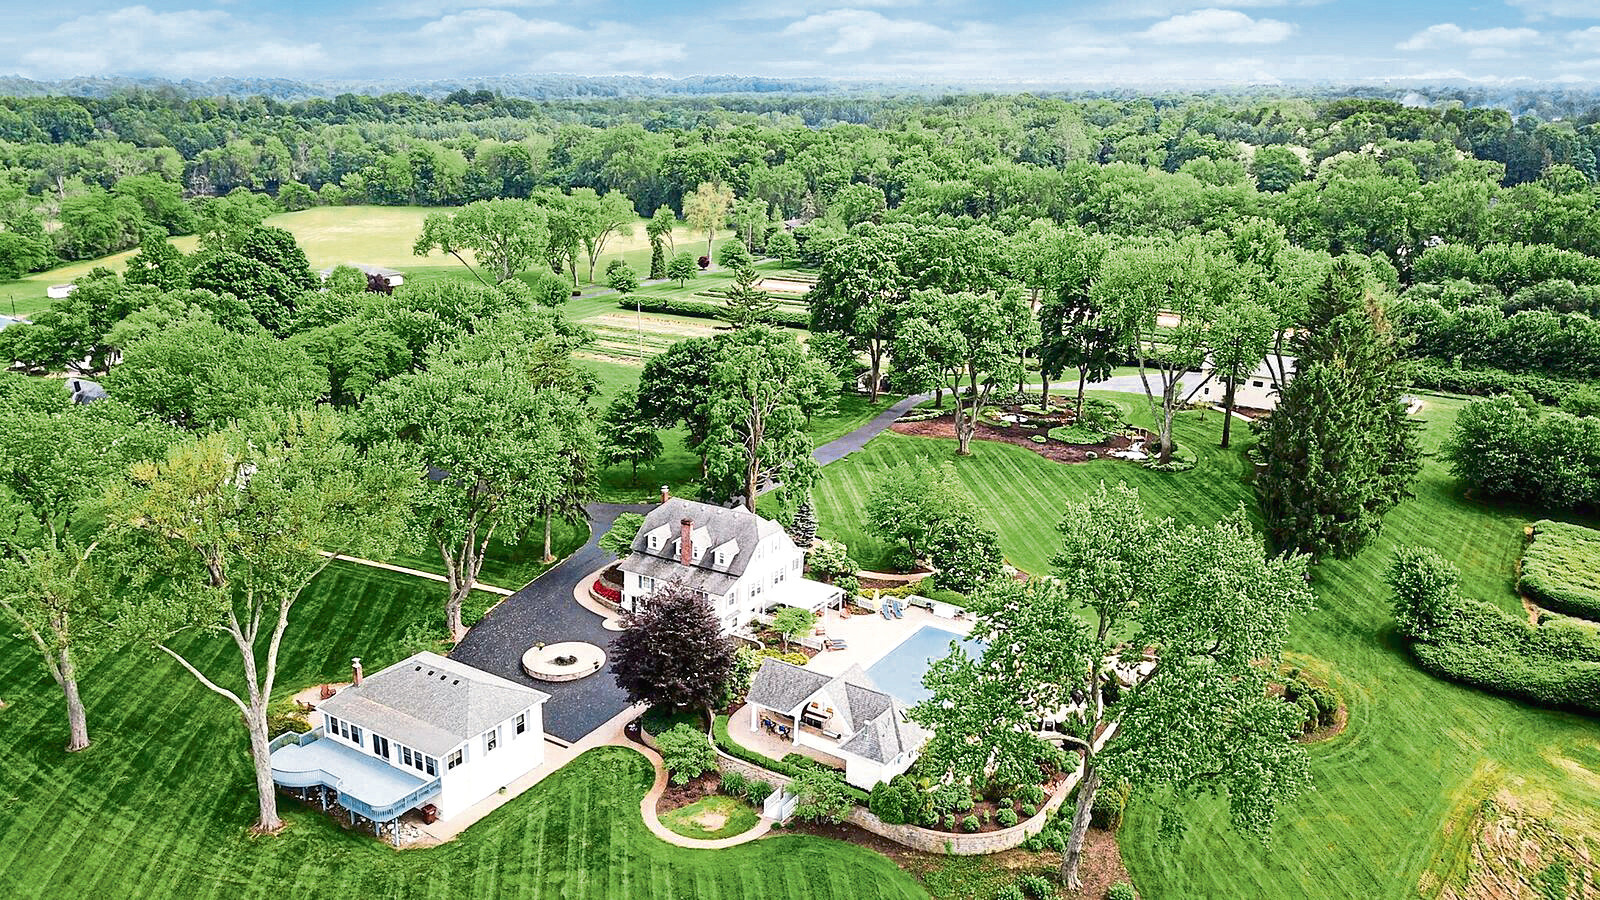 This 81-acre property in Berrien Springs, Michigan was home to Muhammad Ali and his family.